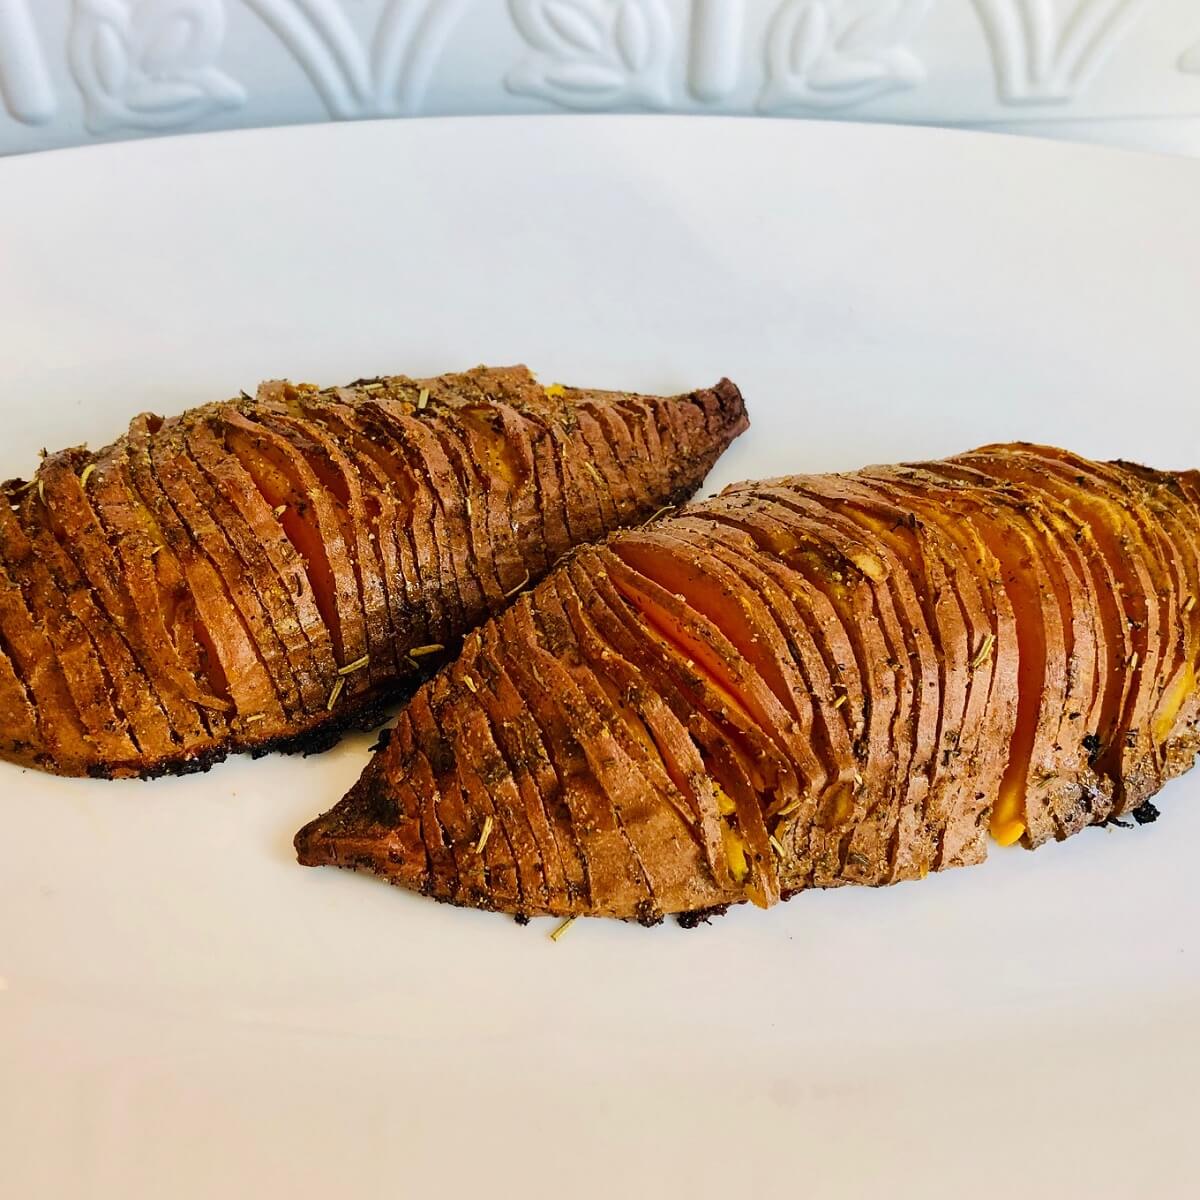 A white platter with two vegan hasselback sweet potatoes with slits cut in them.